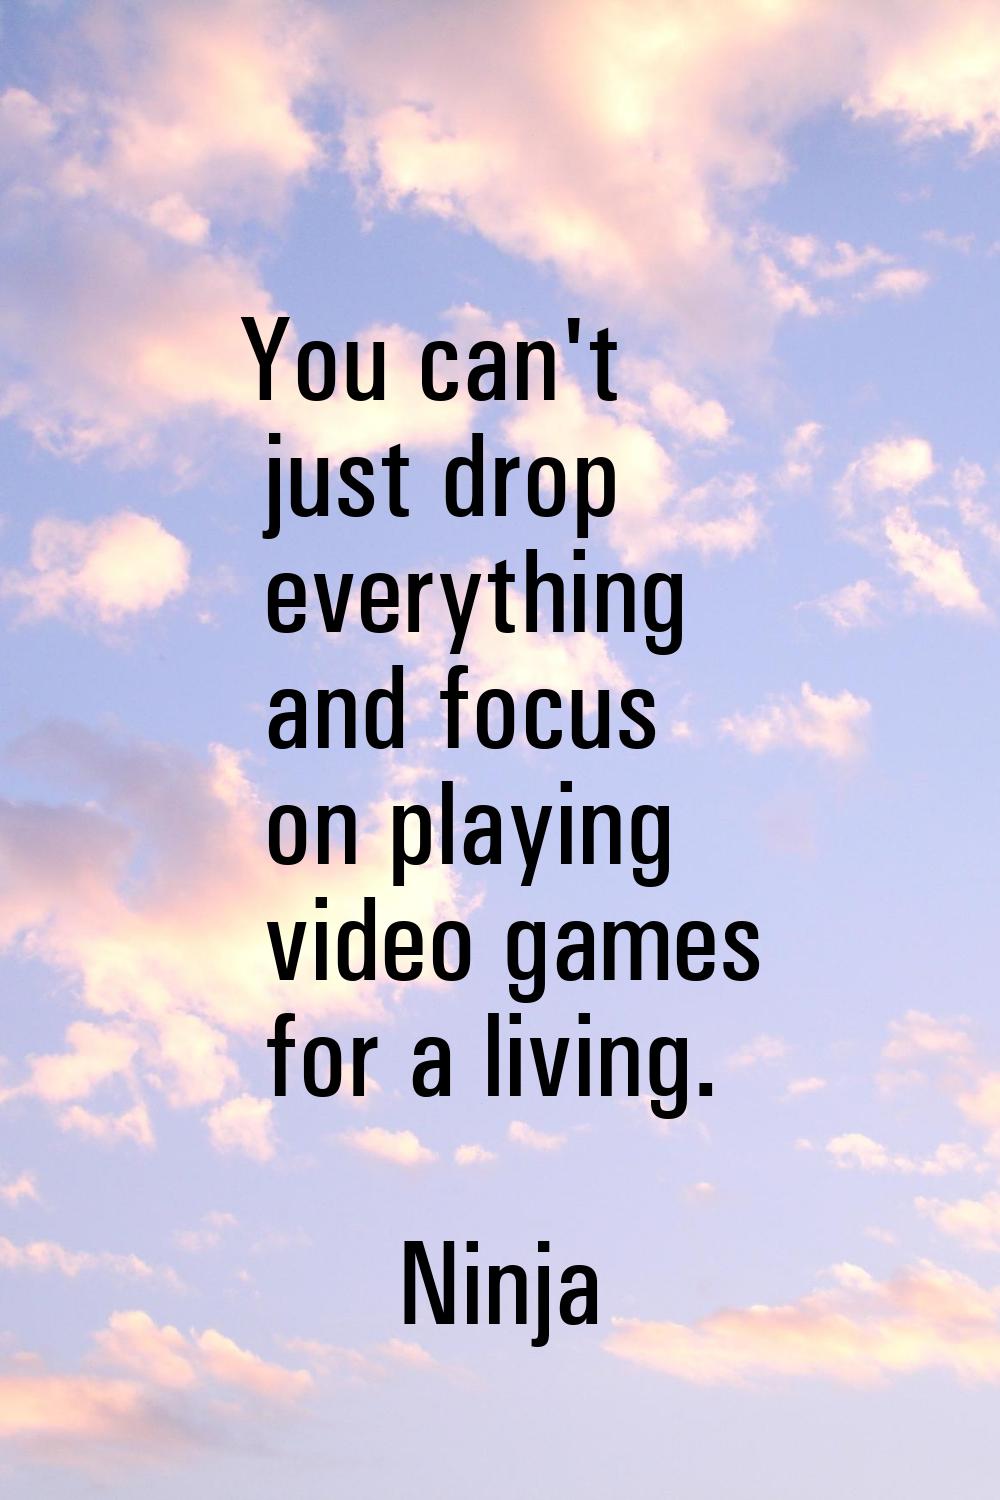 You can't just drop everything and focus on playing video games for a living.